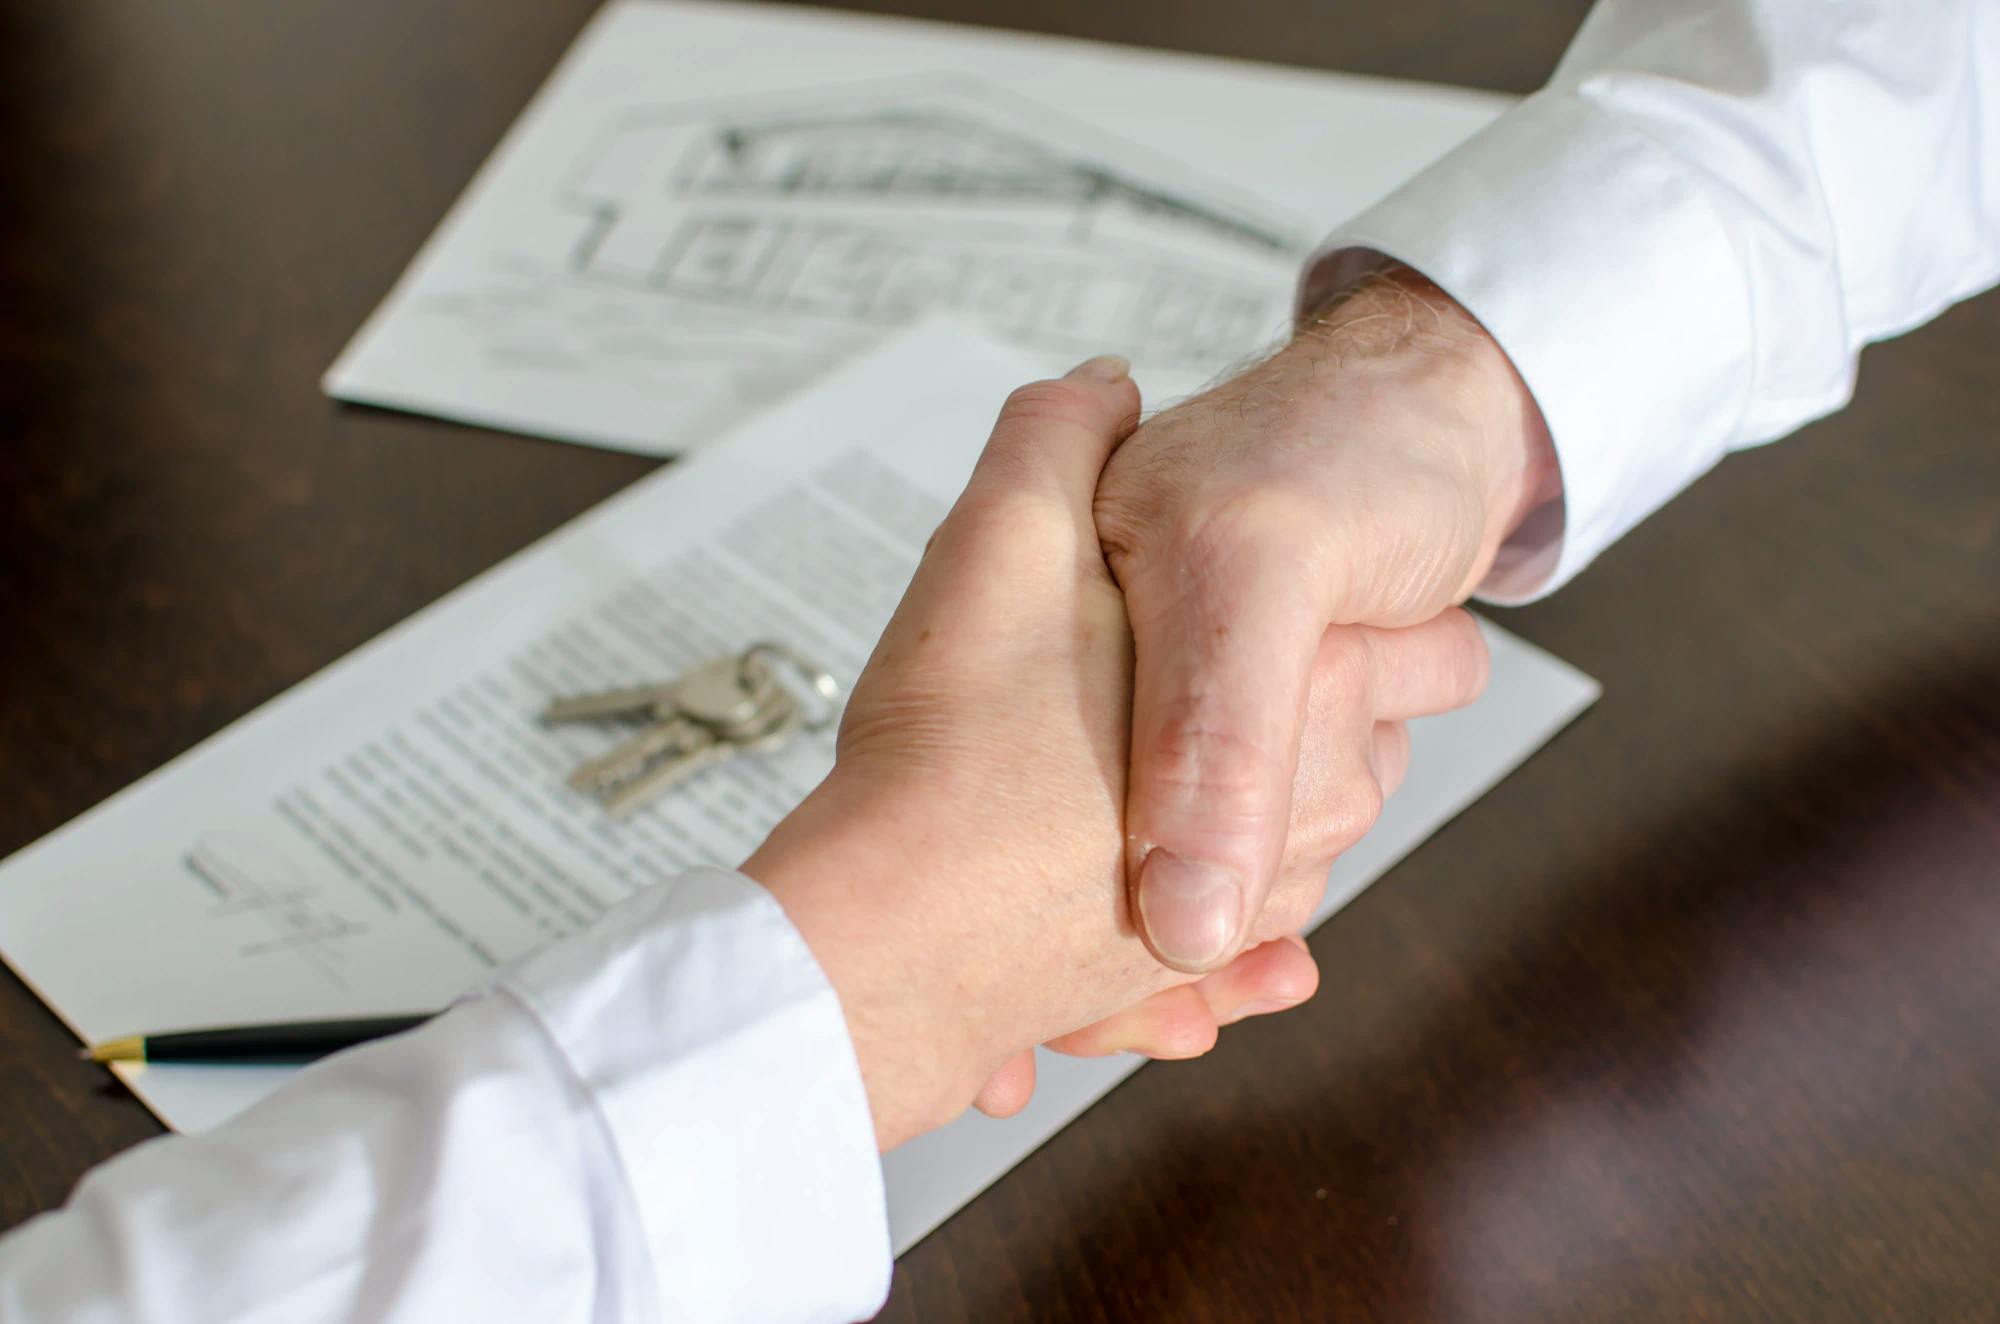 Two people shake hands over a pile of documents.